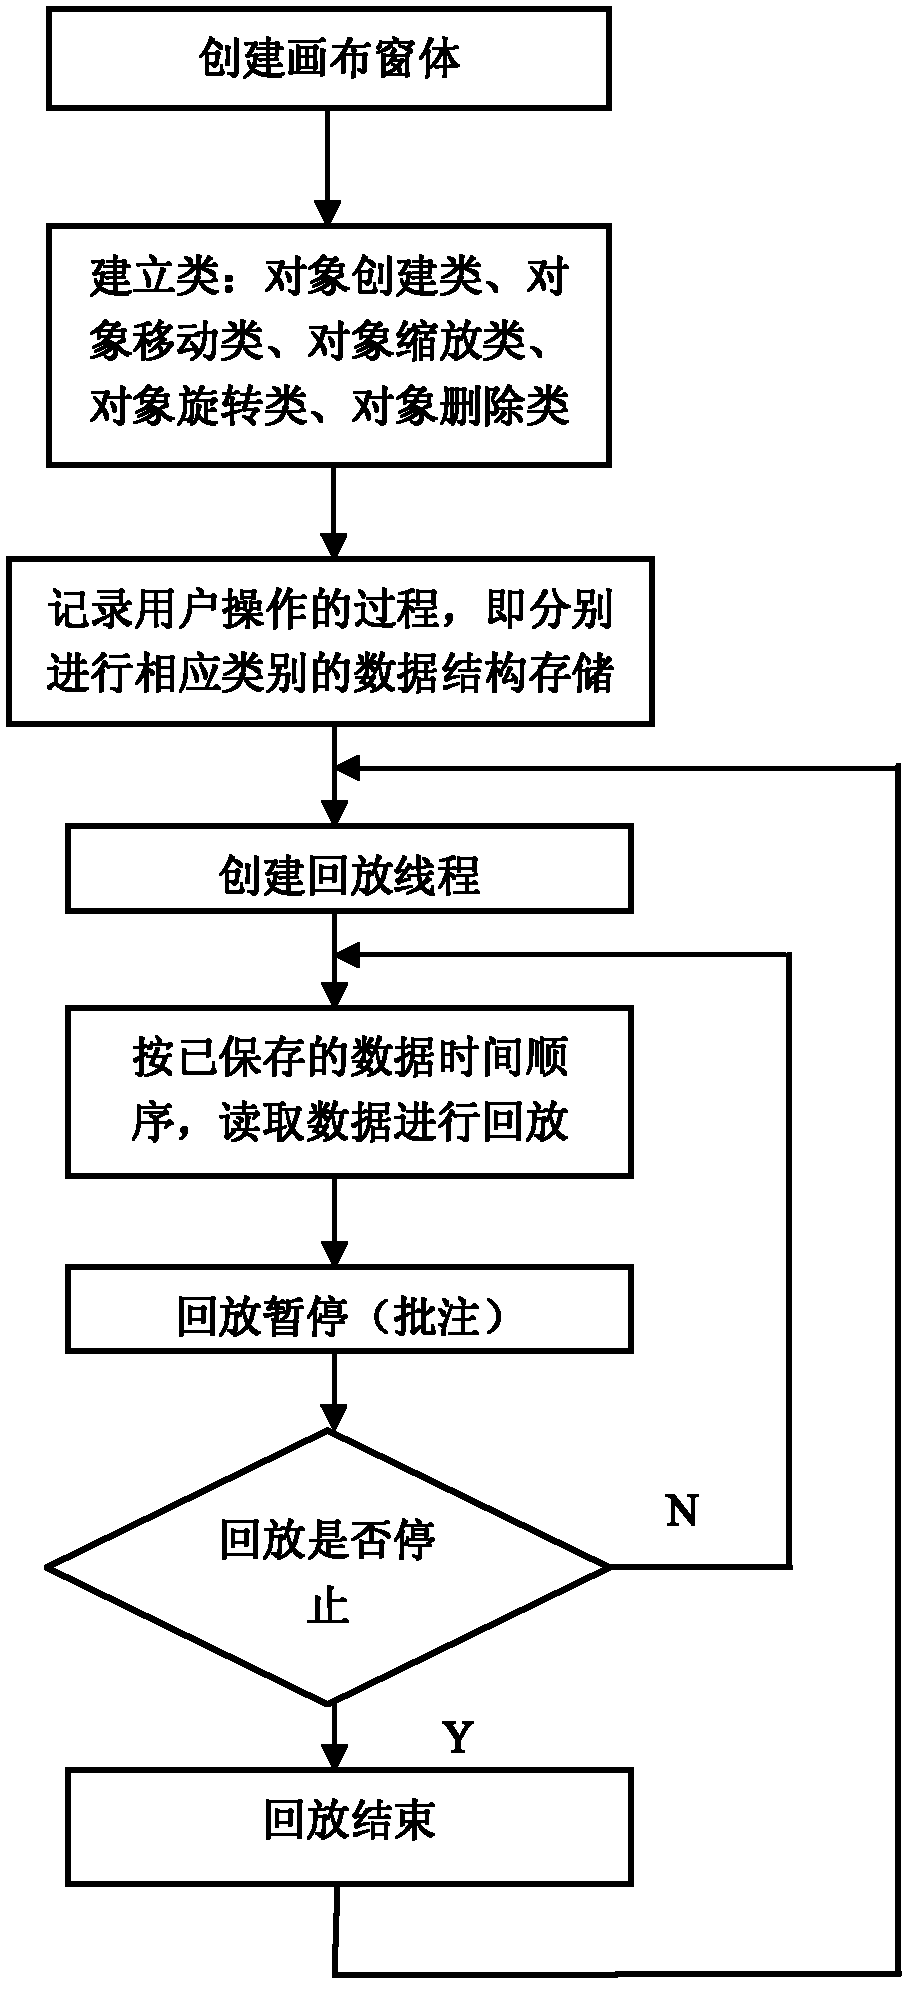 Implementation method for storing and playing back multimedia objects